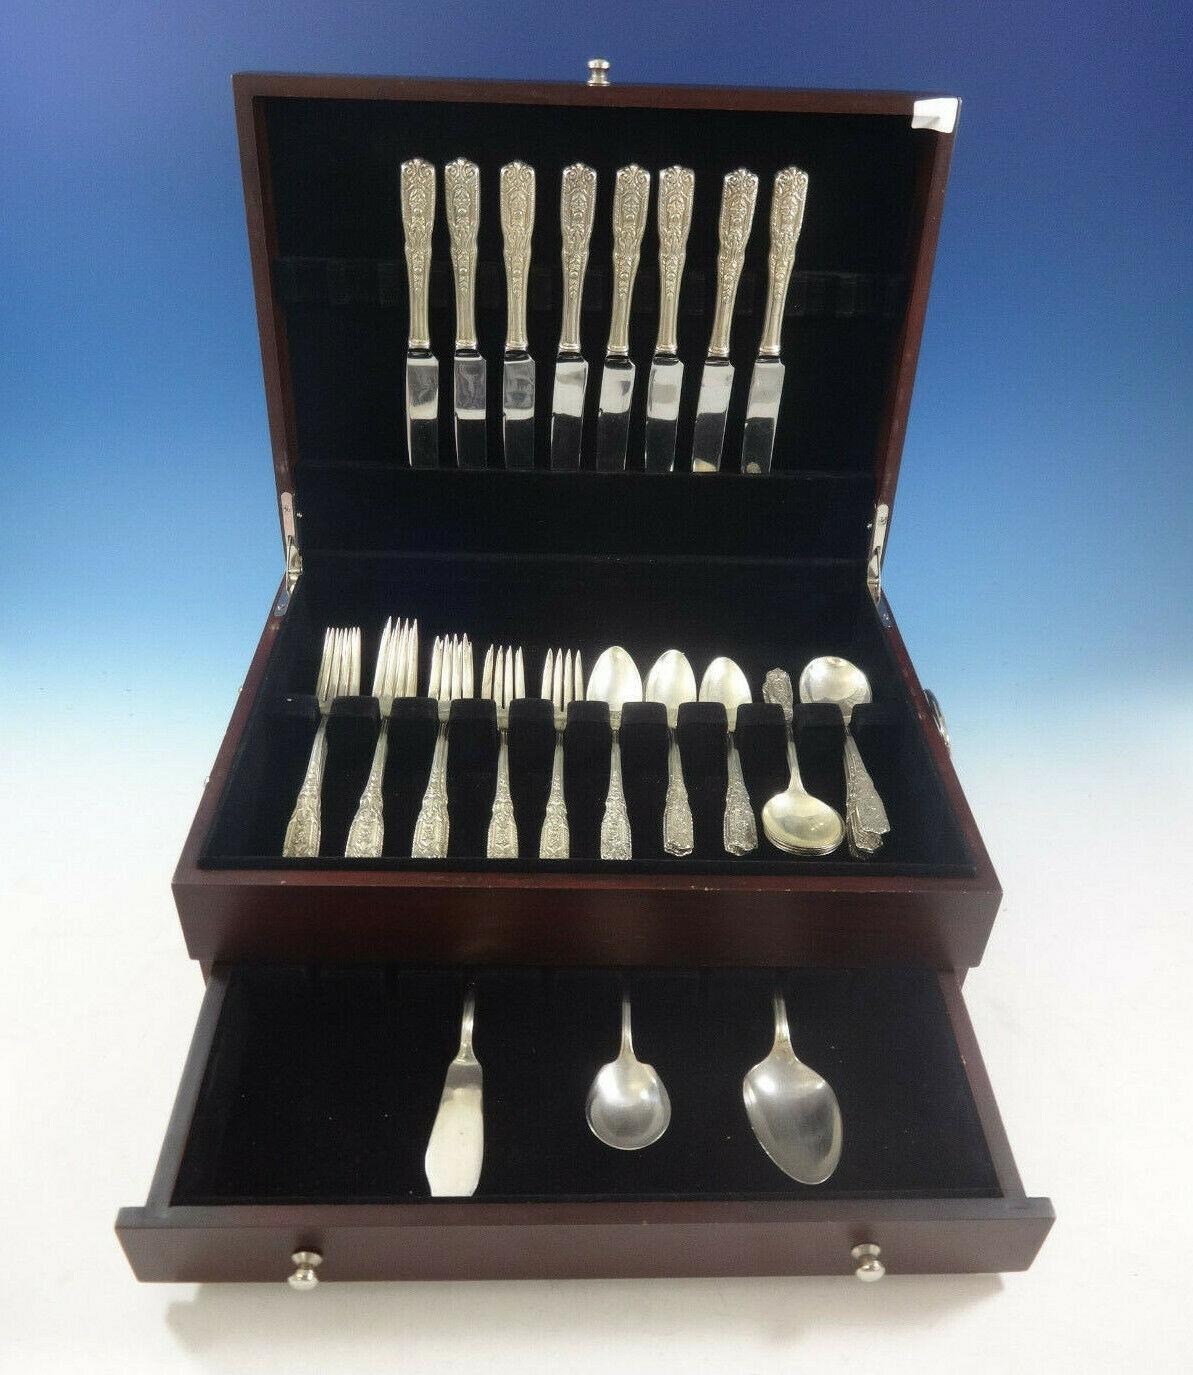 Beautiful Milburn Rose by Westmorland sterling silver flatware set - 43 Pieces. This set includes:

8 knives, 9